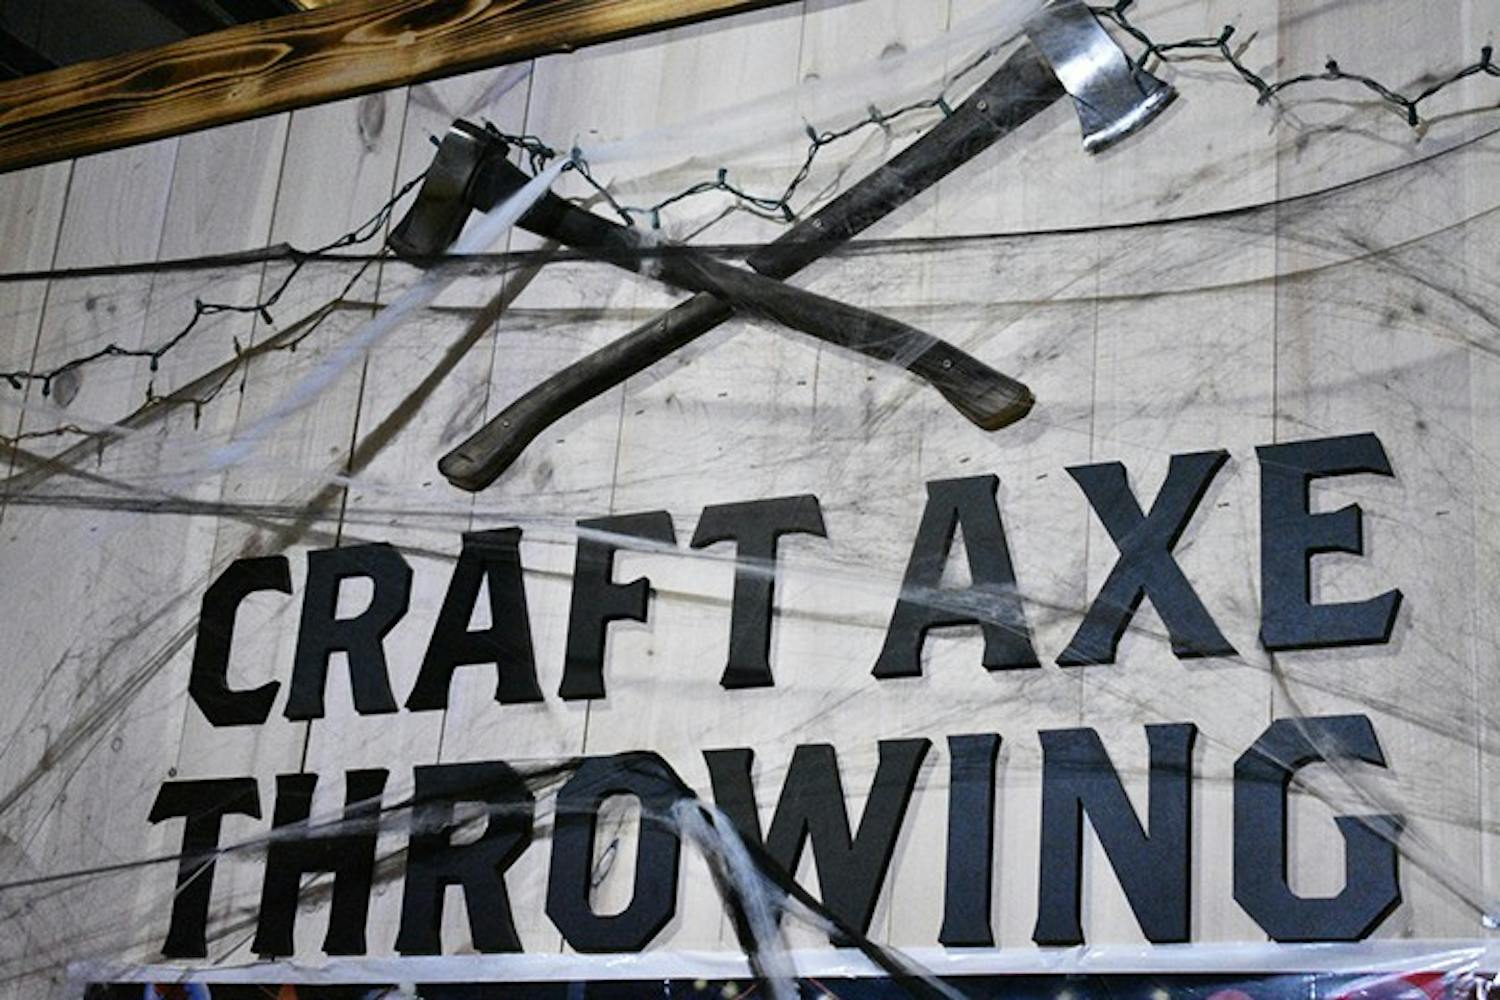 &nbsp;Craft Axe Throwing is located in the Vista on Gervais Street.